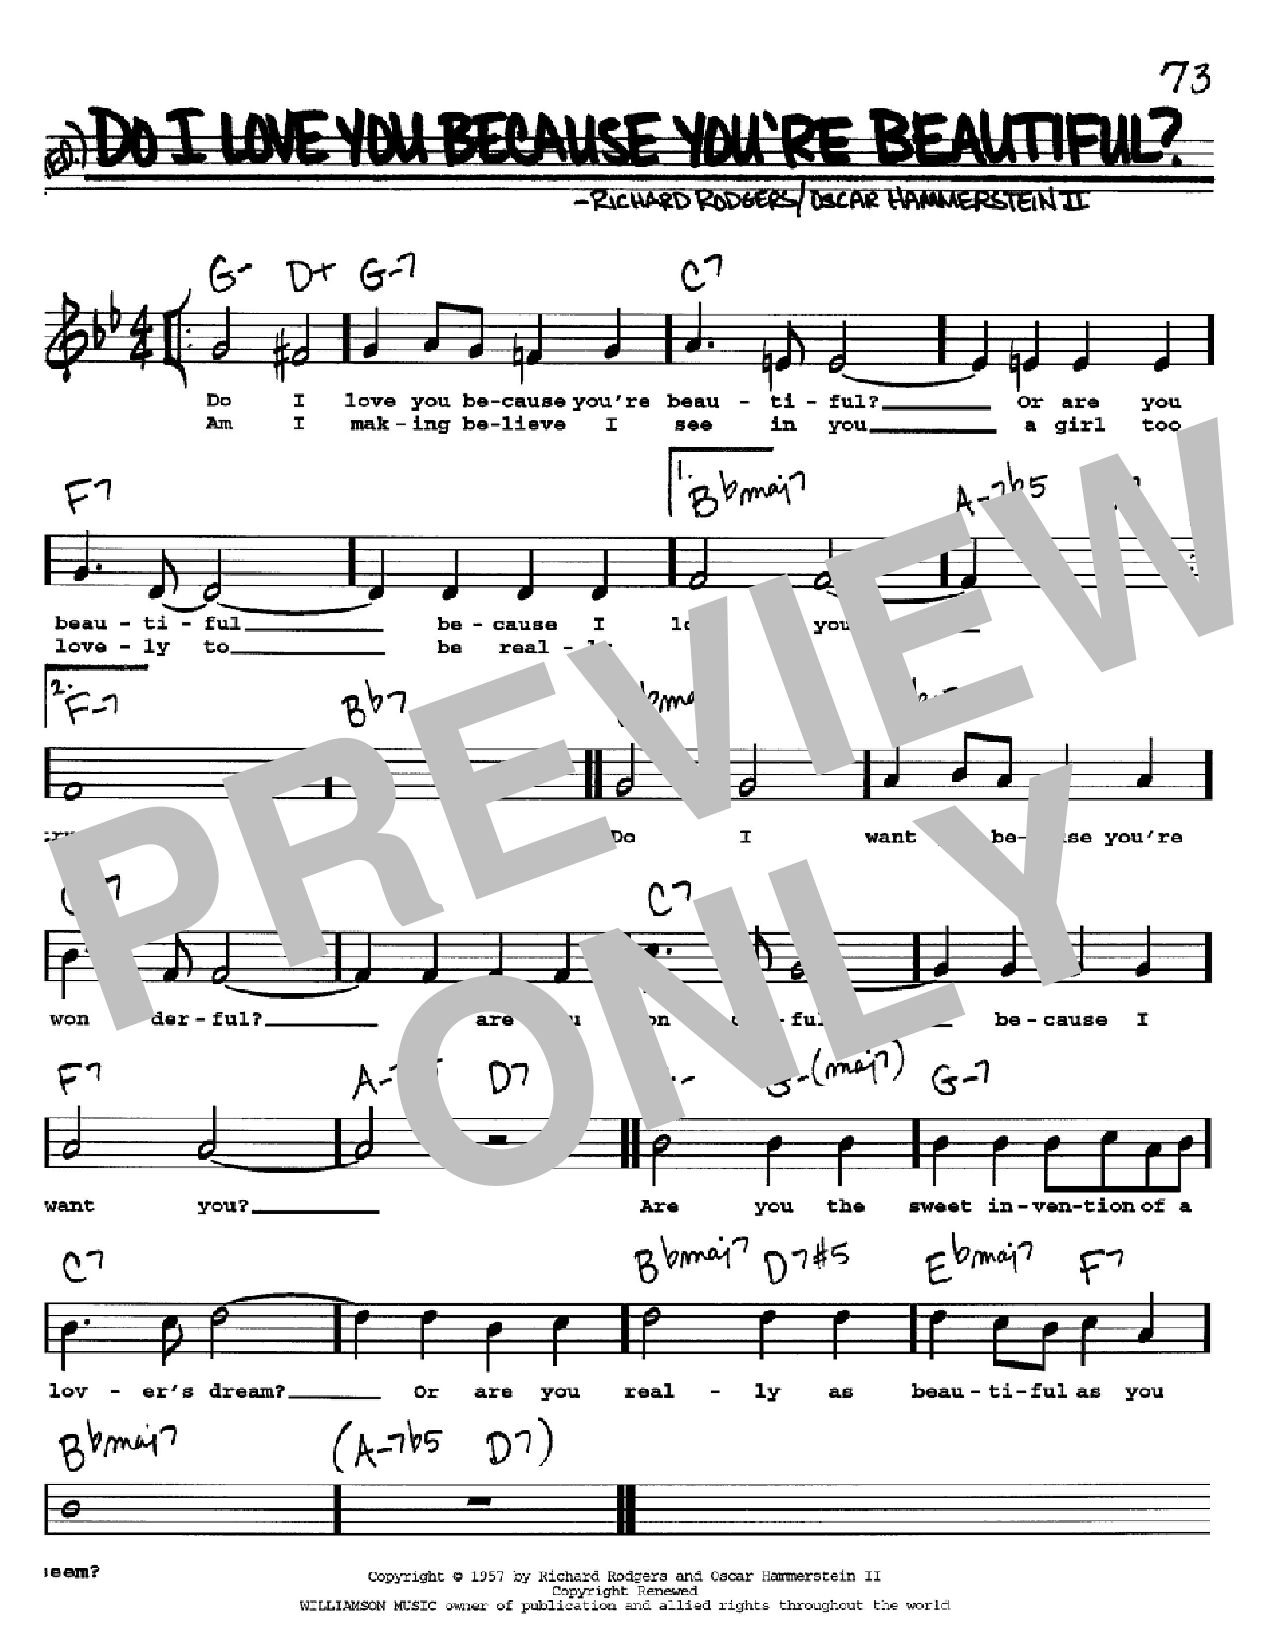 Download Rodgers & Hammerstein Do I Love You Because You're Beautiful? Sheet Music